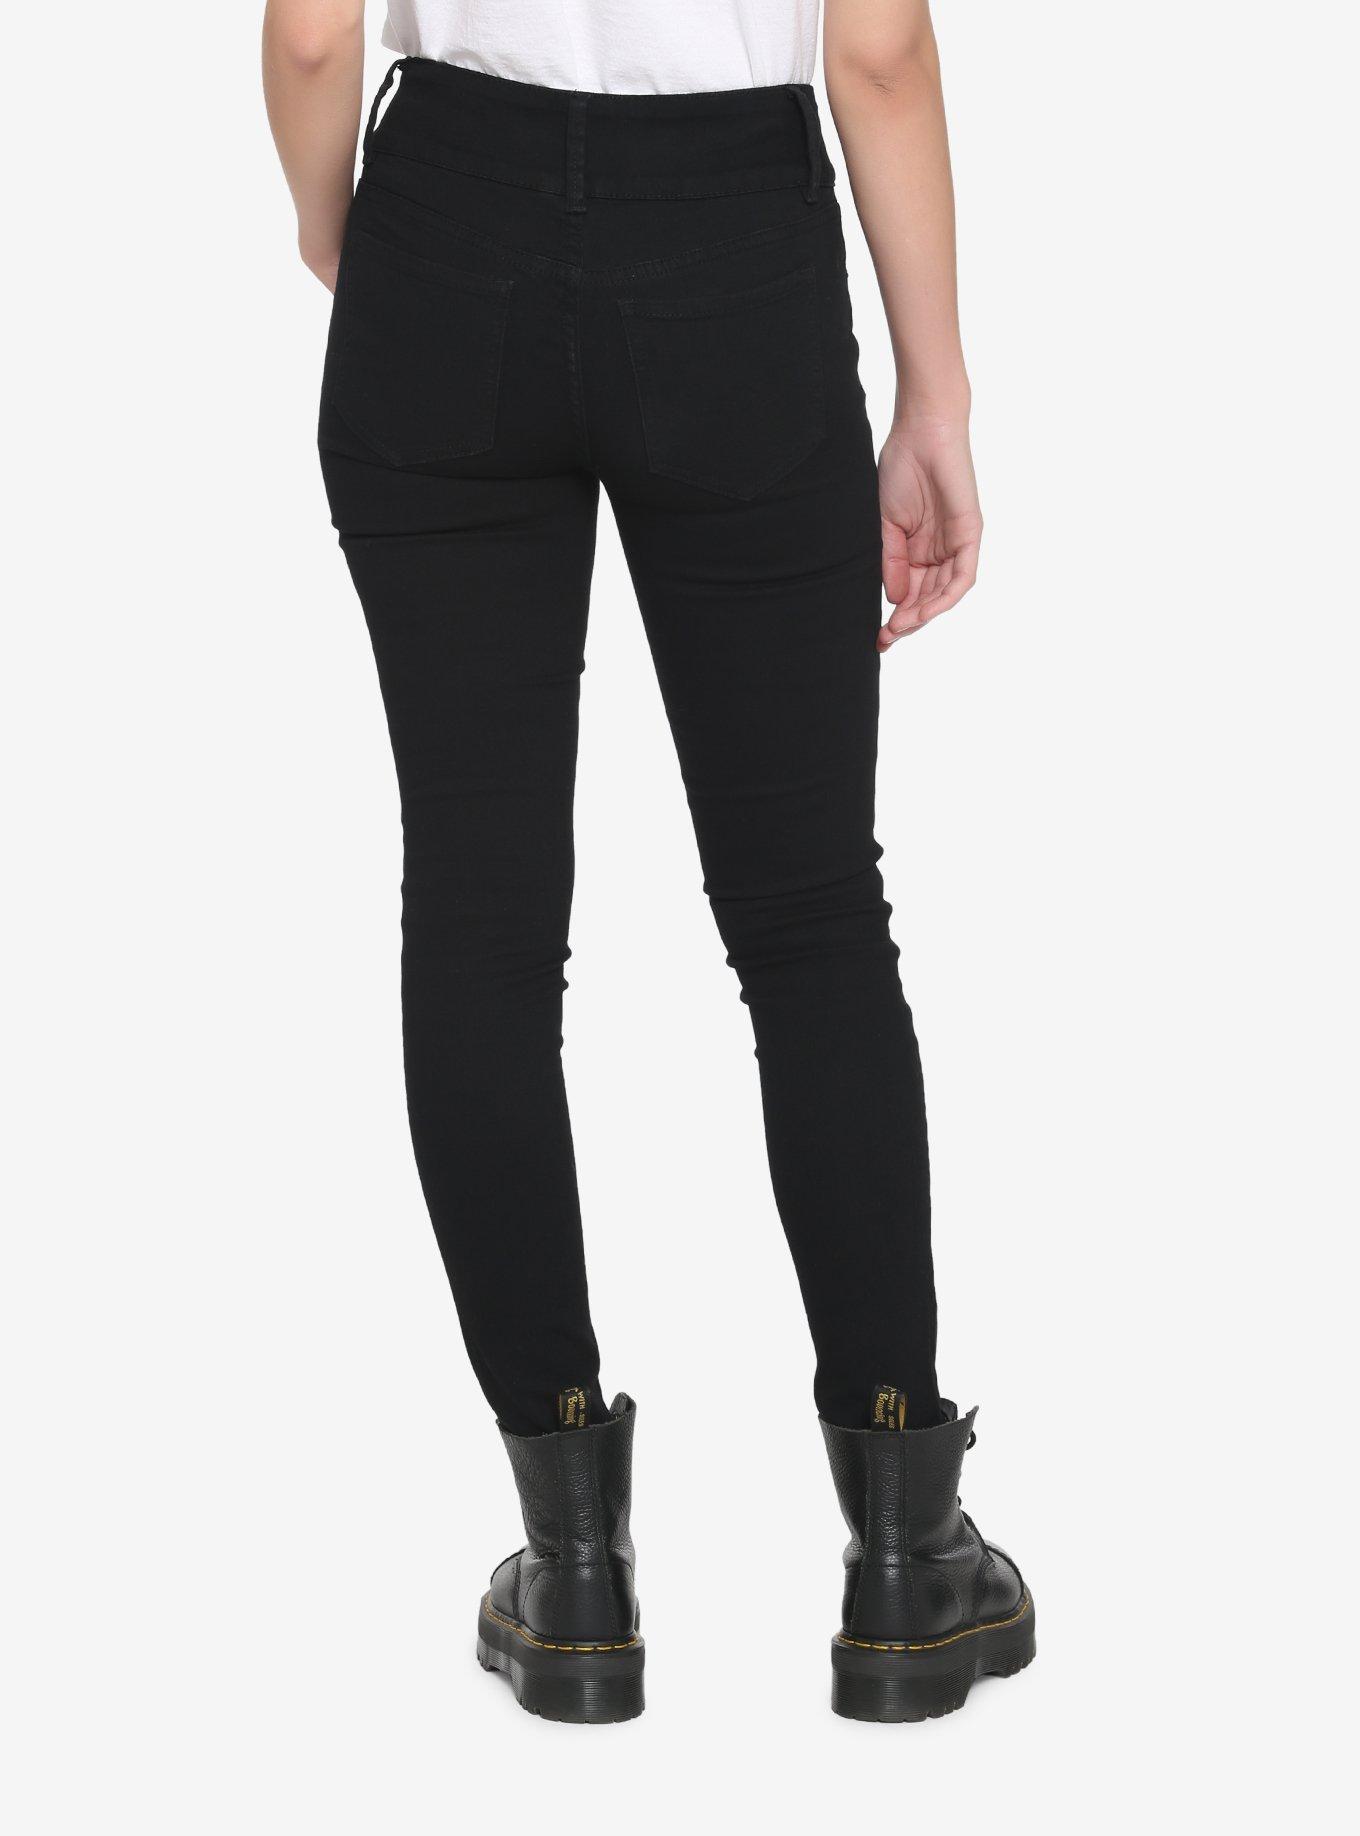 Black 3-Button Skinny Jeans | Hot Topic